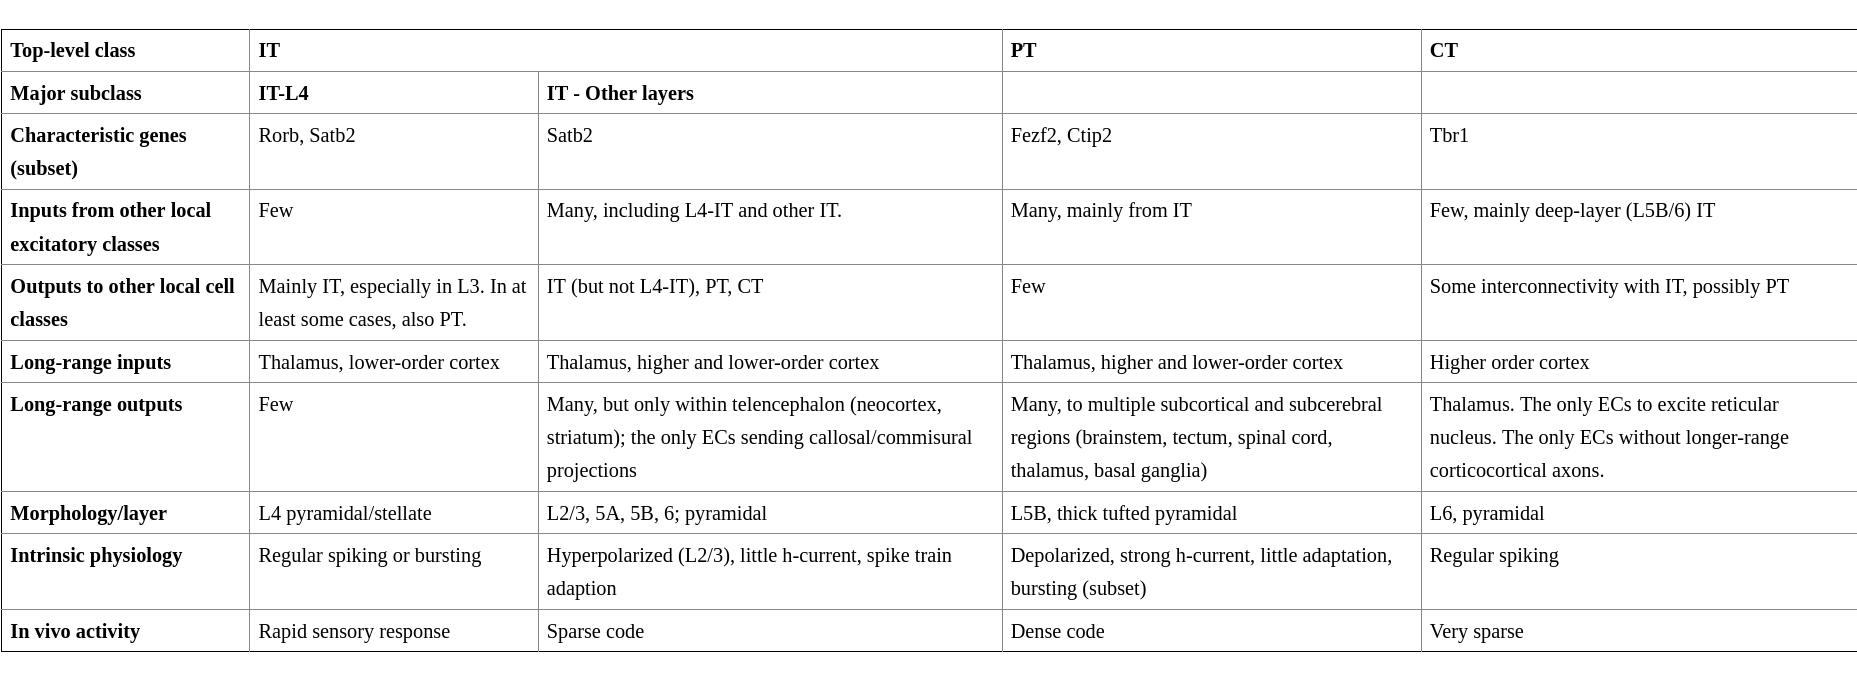 Table with overview of excitatoryclasses